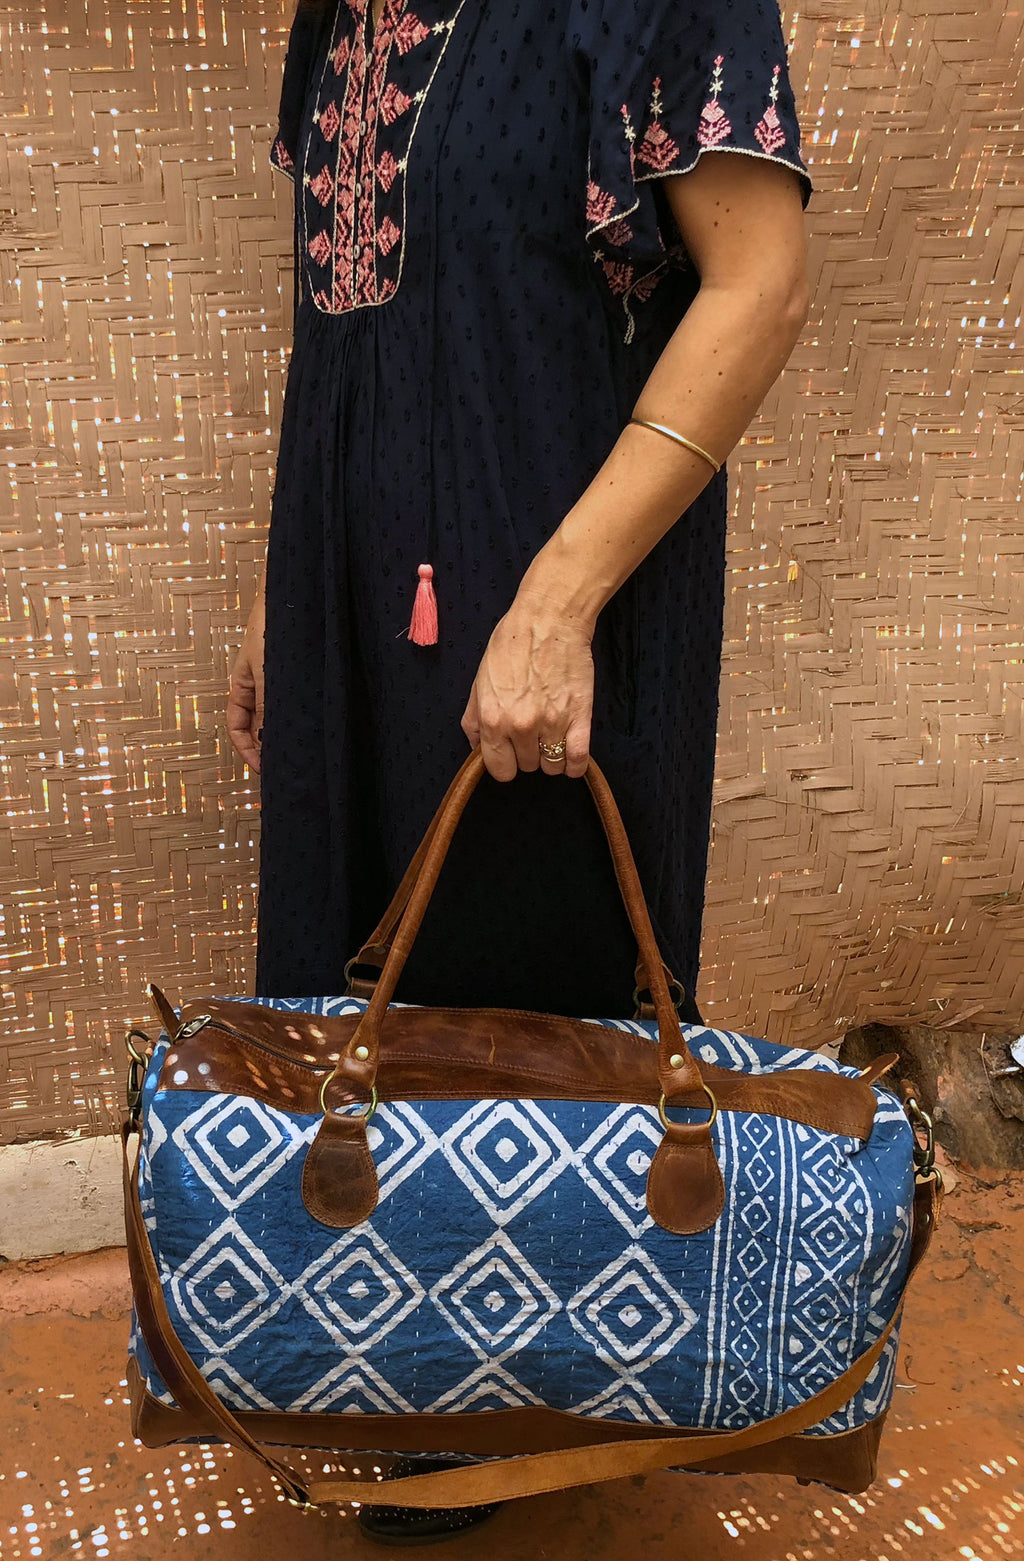 Boho Travel Bag with Vintage Fabric and Leather